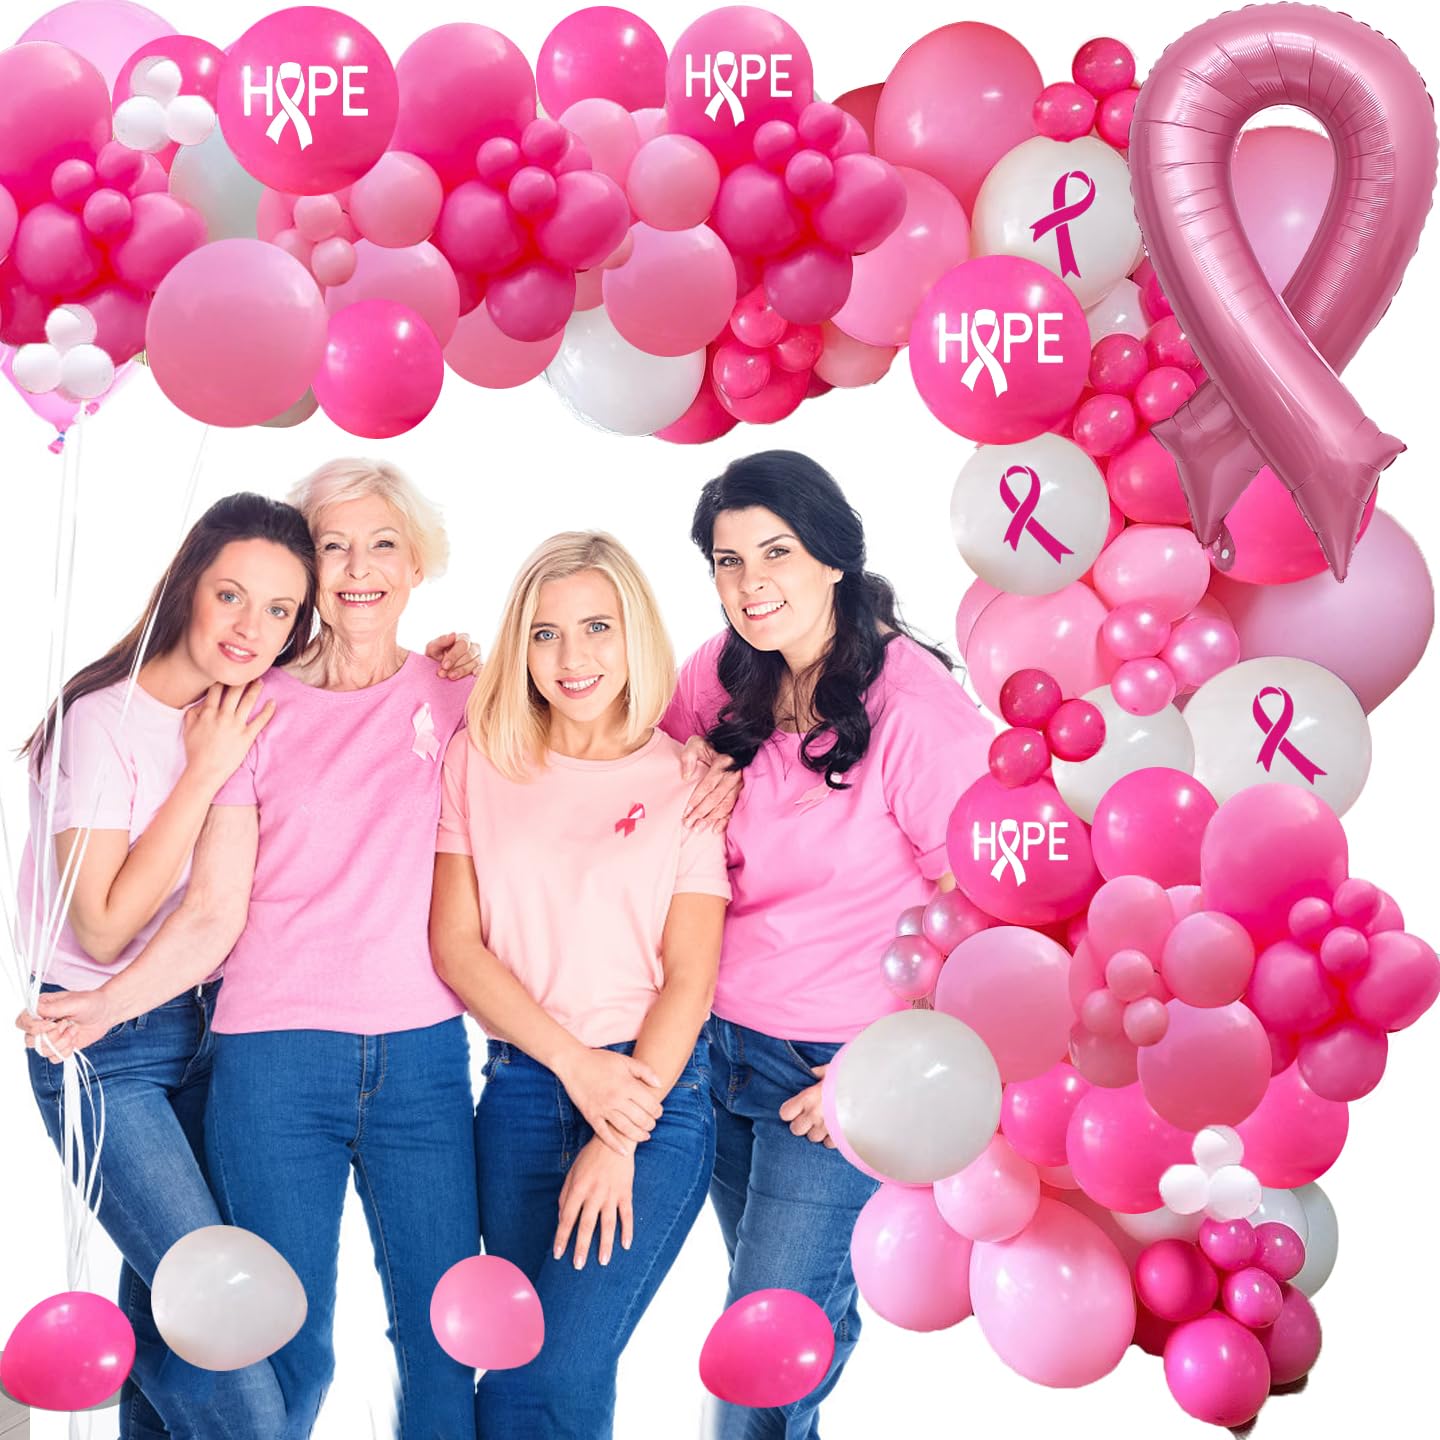 Breast Cancer Awareness Party Decorations Kit 130 Pcs Breast Cancer Awareness Balloons Arch Garland Pink Ribbon Balloons for Breast Cancer Awareness Pink Ribbon Party Decorations Supplies